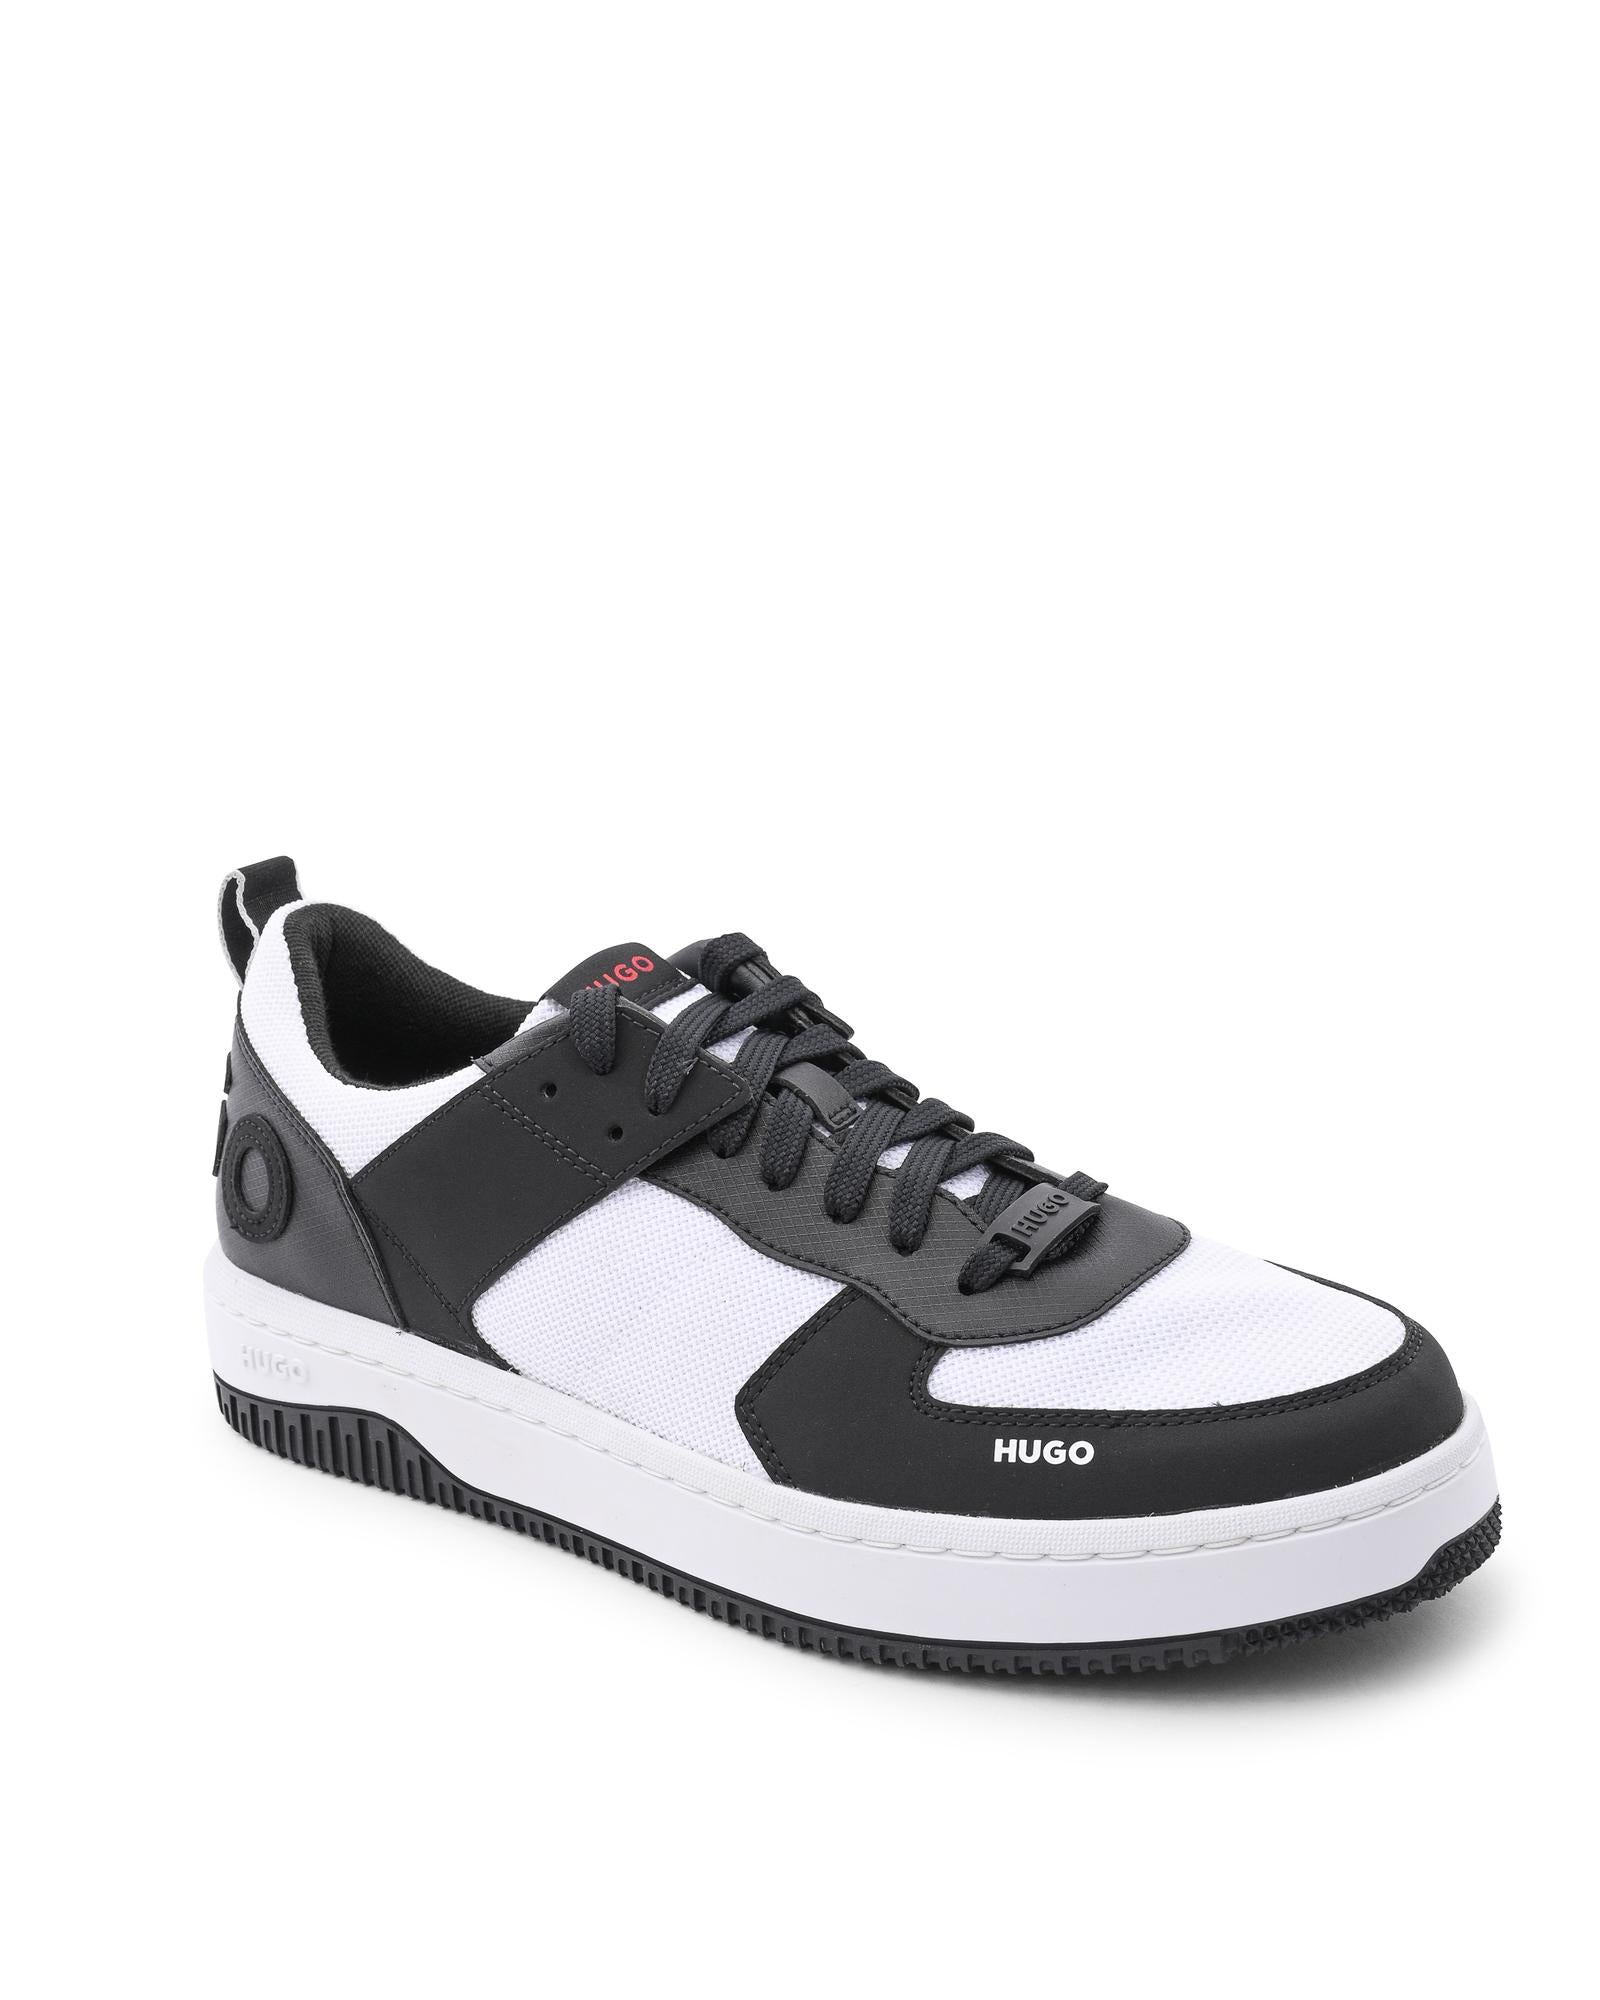 Men's Charcoal Calfskin Sneakers with Rubber Sole in Multicolor - 44 EU